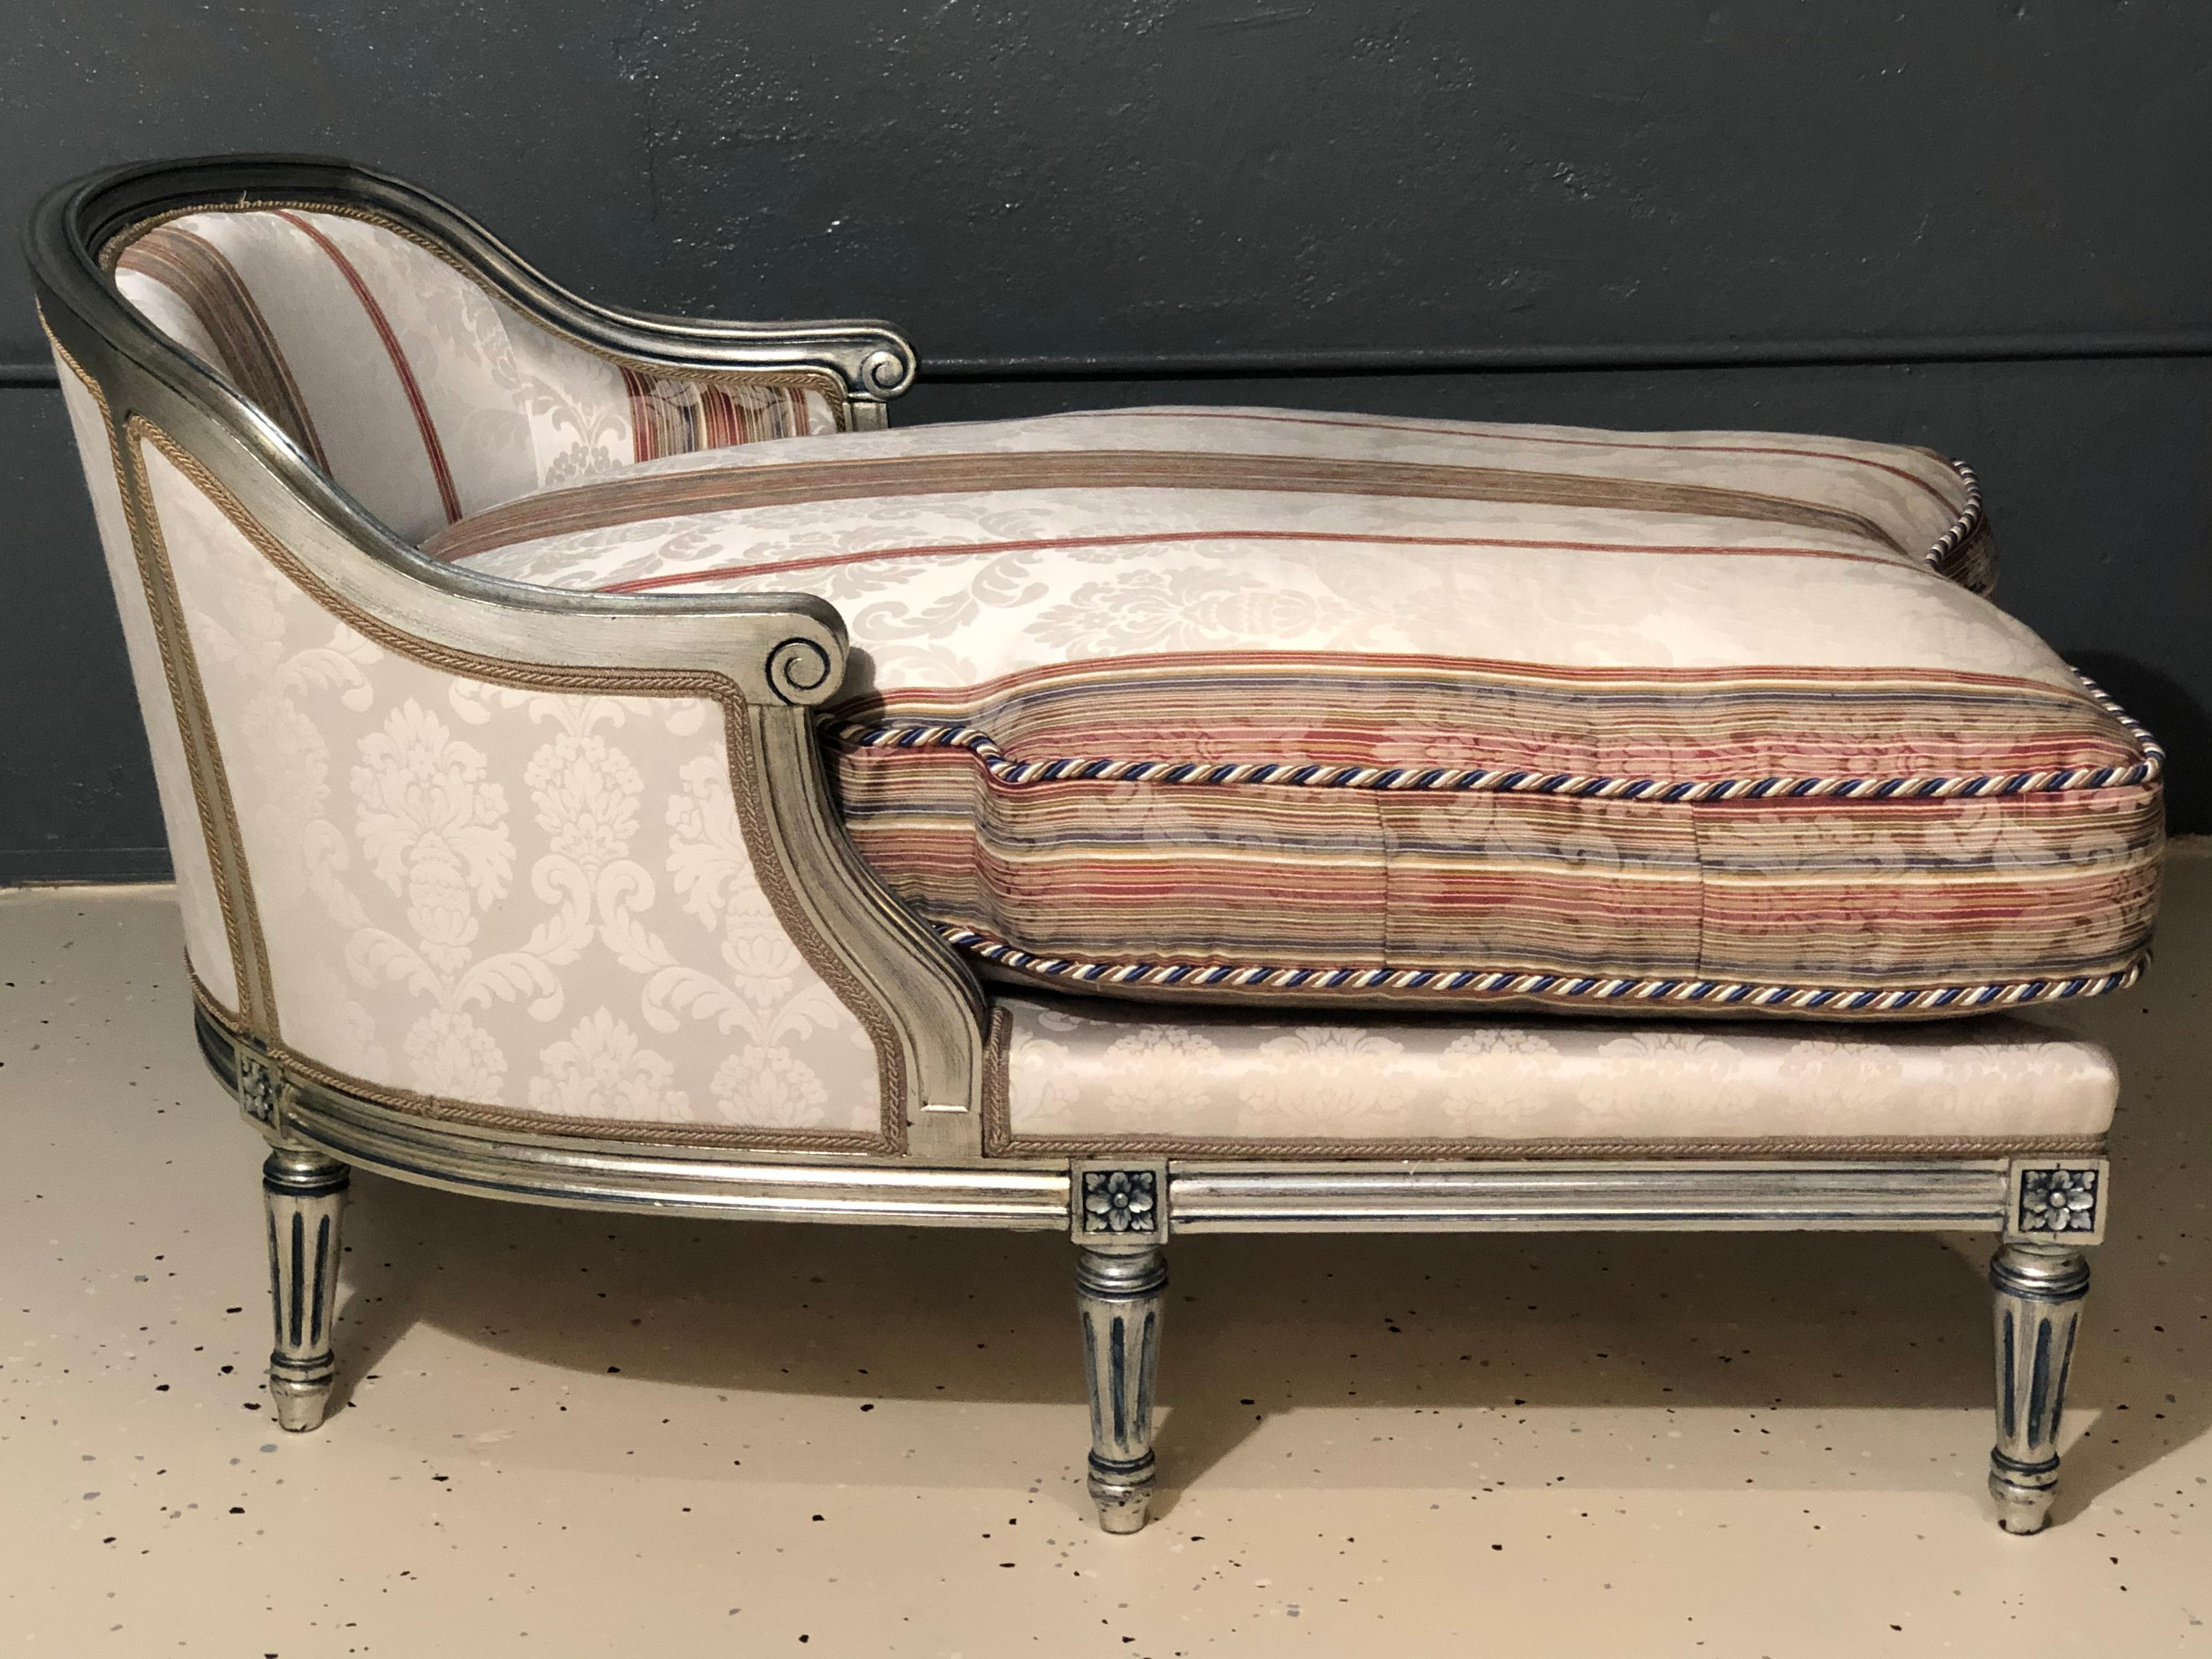 Jansen Inspired, Hollywood Regency, Chaise Louges, Painted Wood, Silver, 1950s For Sale 2